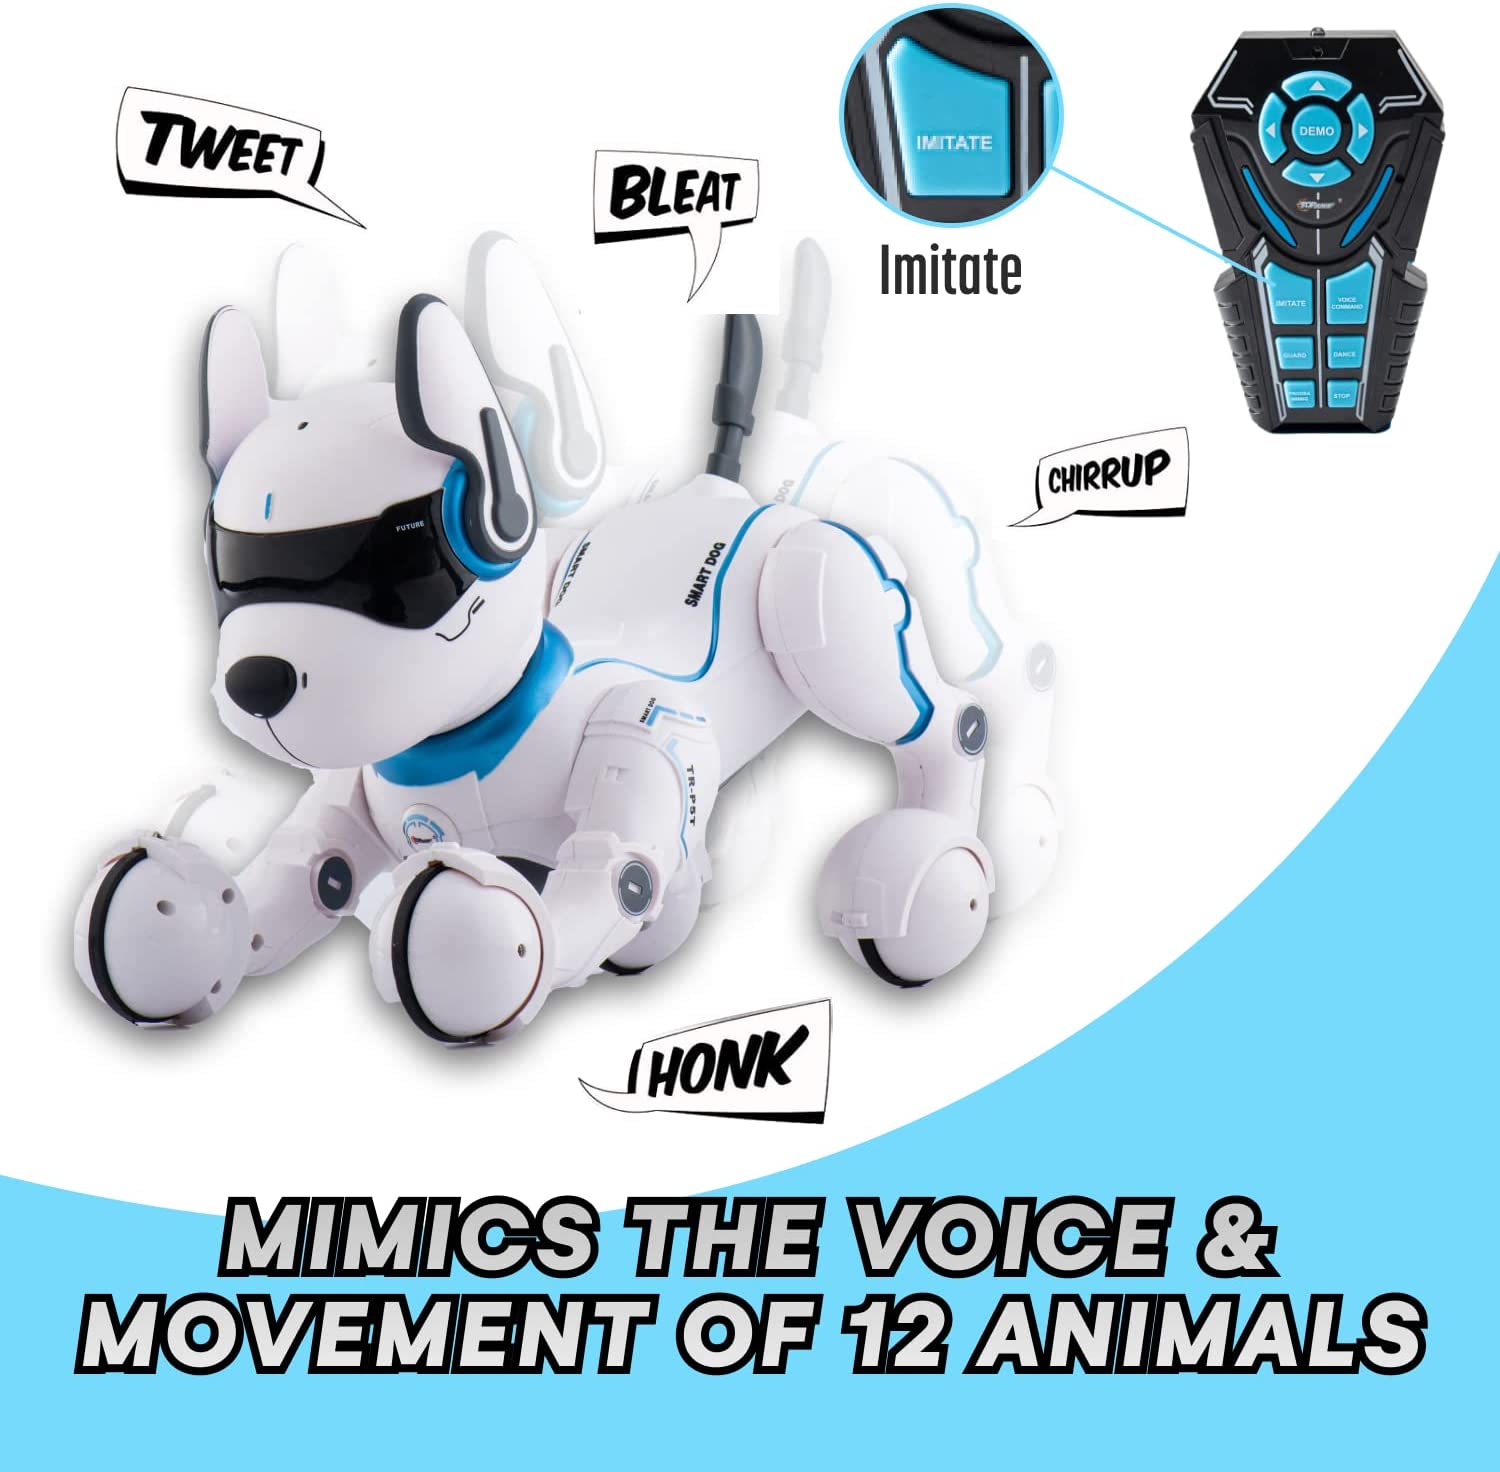 Remote-Controlled Robot Dog Toy for Kids 3-10 Years - Smart & Dancing, Mimics Animals .